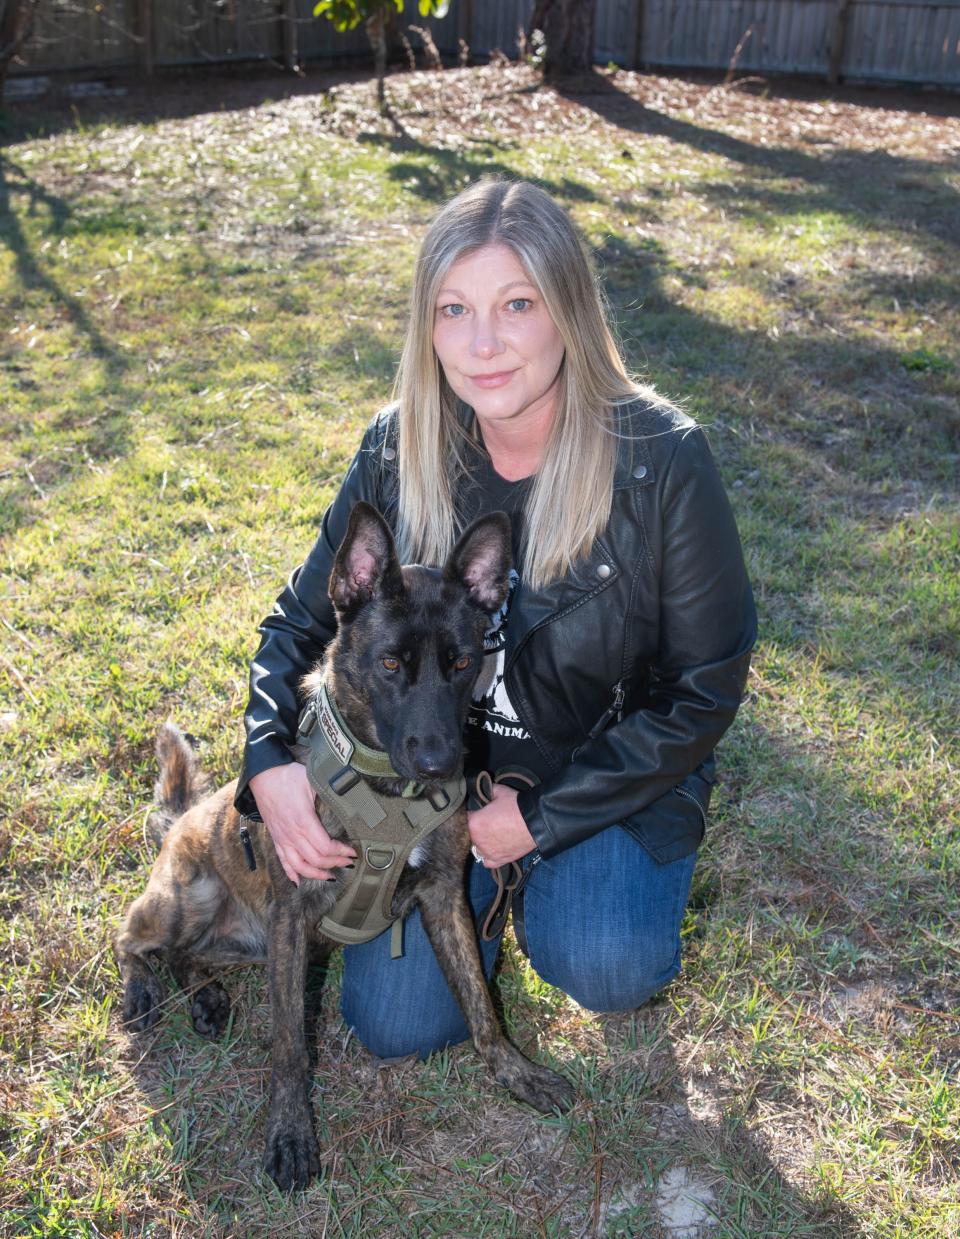 Former Pensacola Humane Society interim executive director Manda Moore-Joseph has filed a countersuit against the Humane Society's board of directors alleging defamation of her character and a violation of her protections under the Federal Whistleblower's Act.